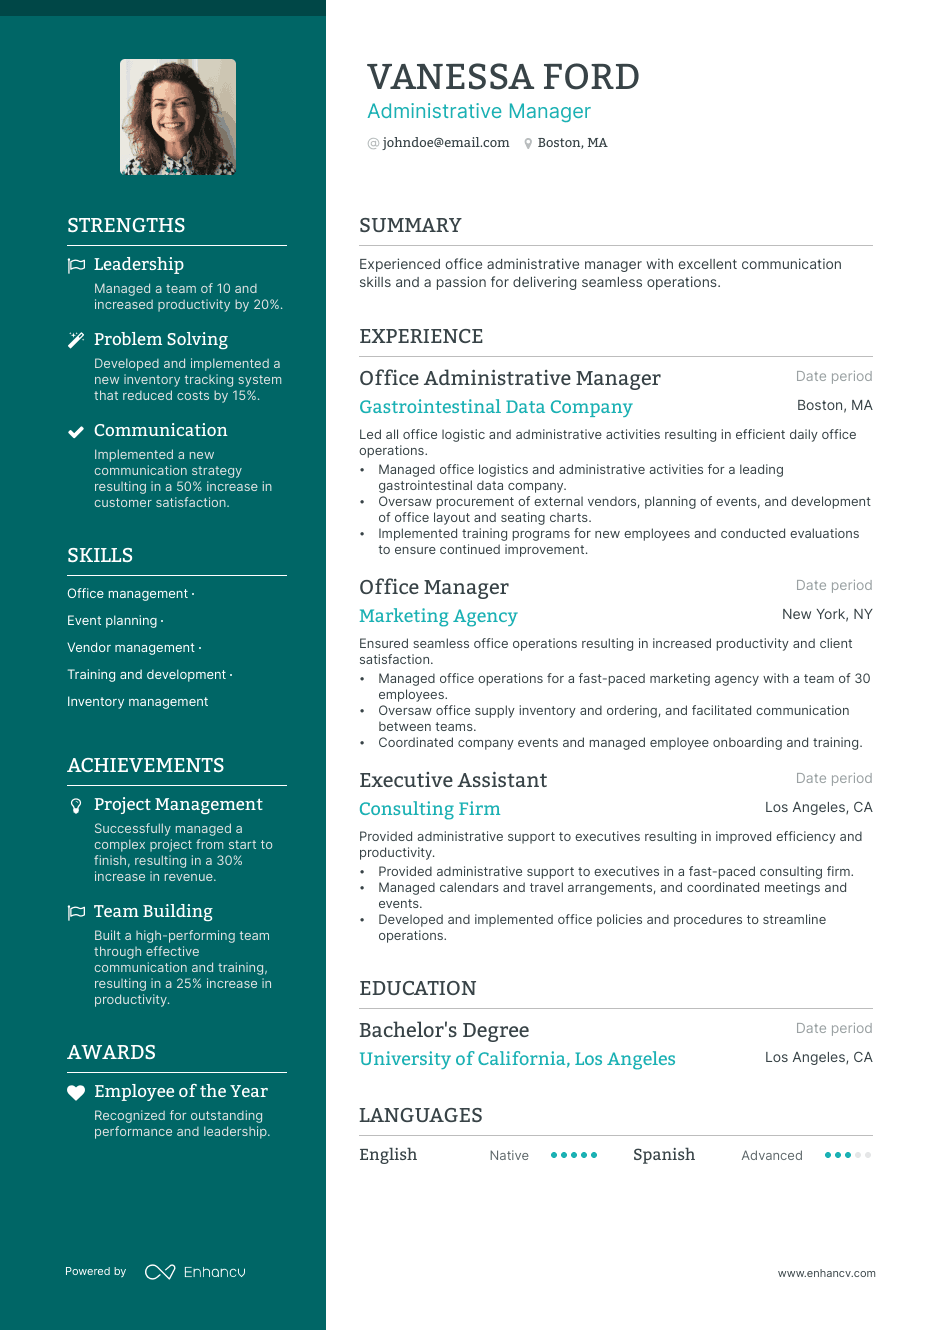 Administrative Manager resume example